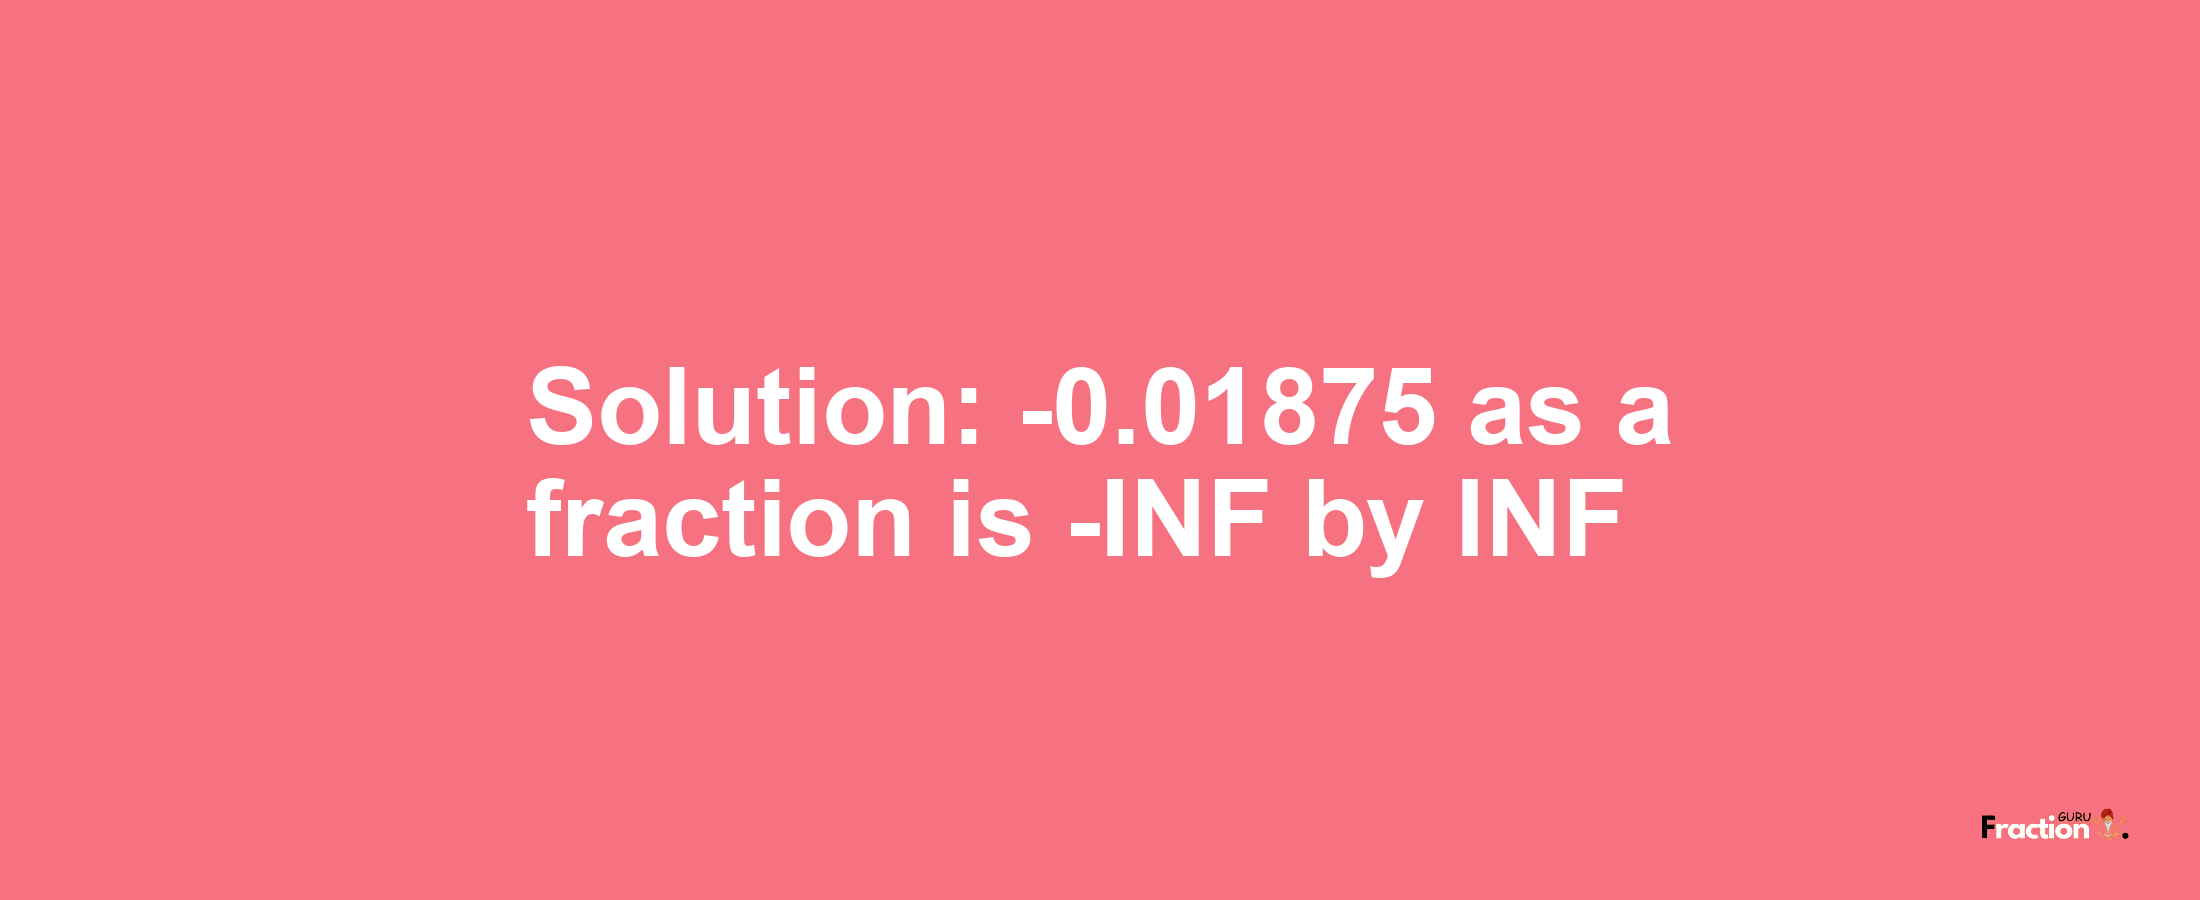 Solution:-0.01875 as a fraction is -INF/INF